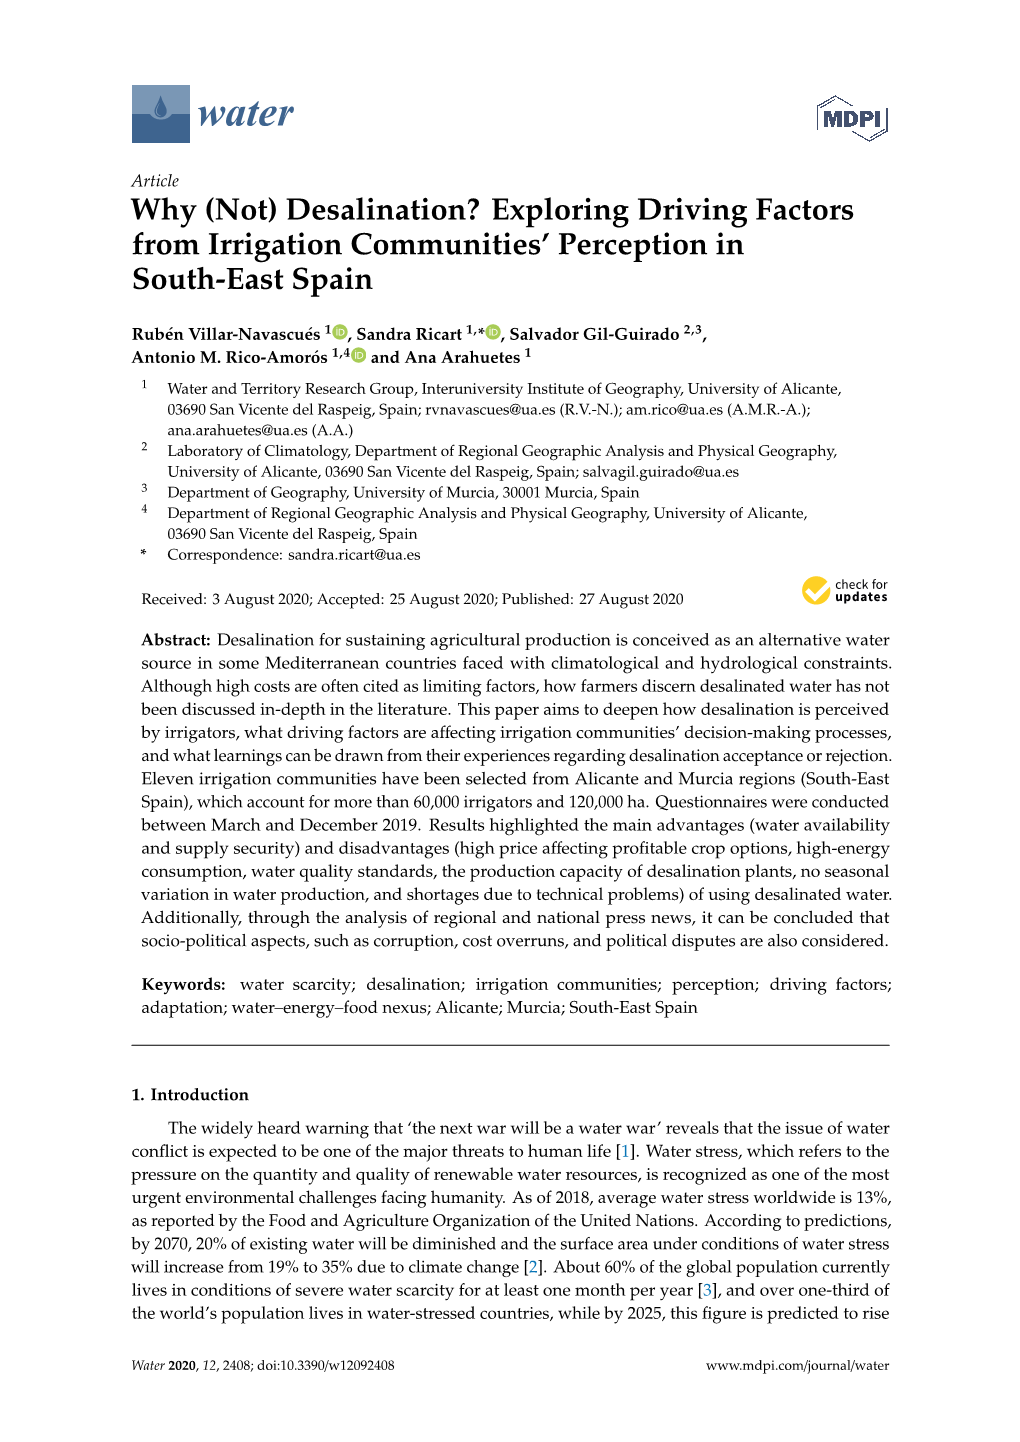 Desalination? Exploring Driving Factors from Irrigation Communities’ Perception in South-East Spain